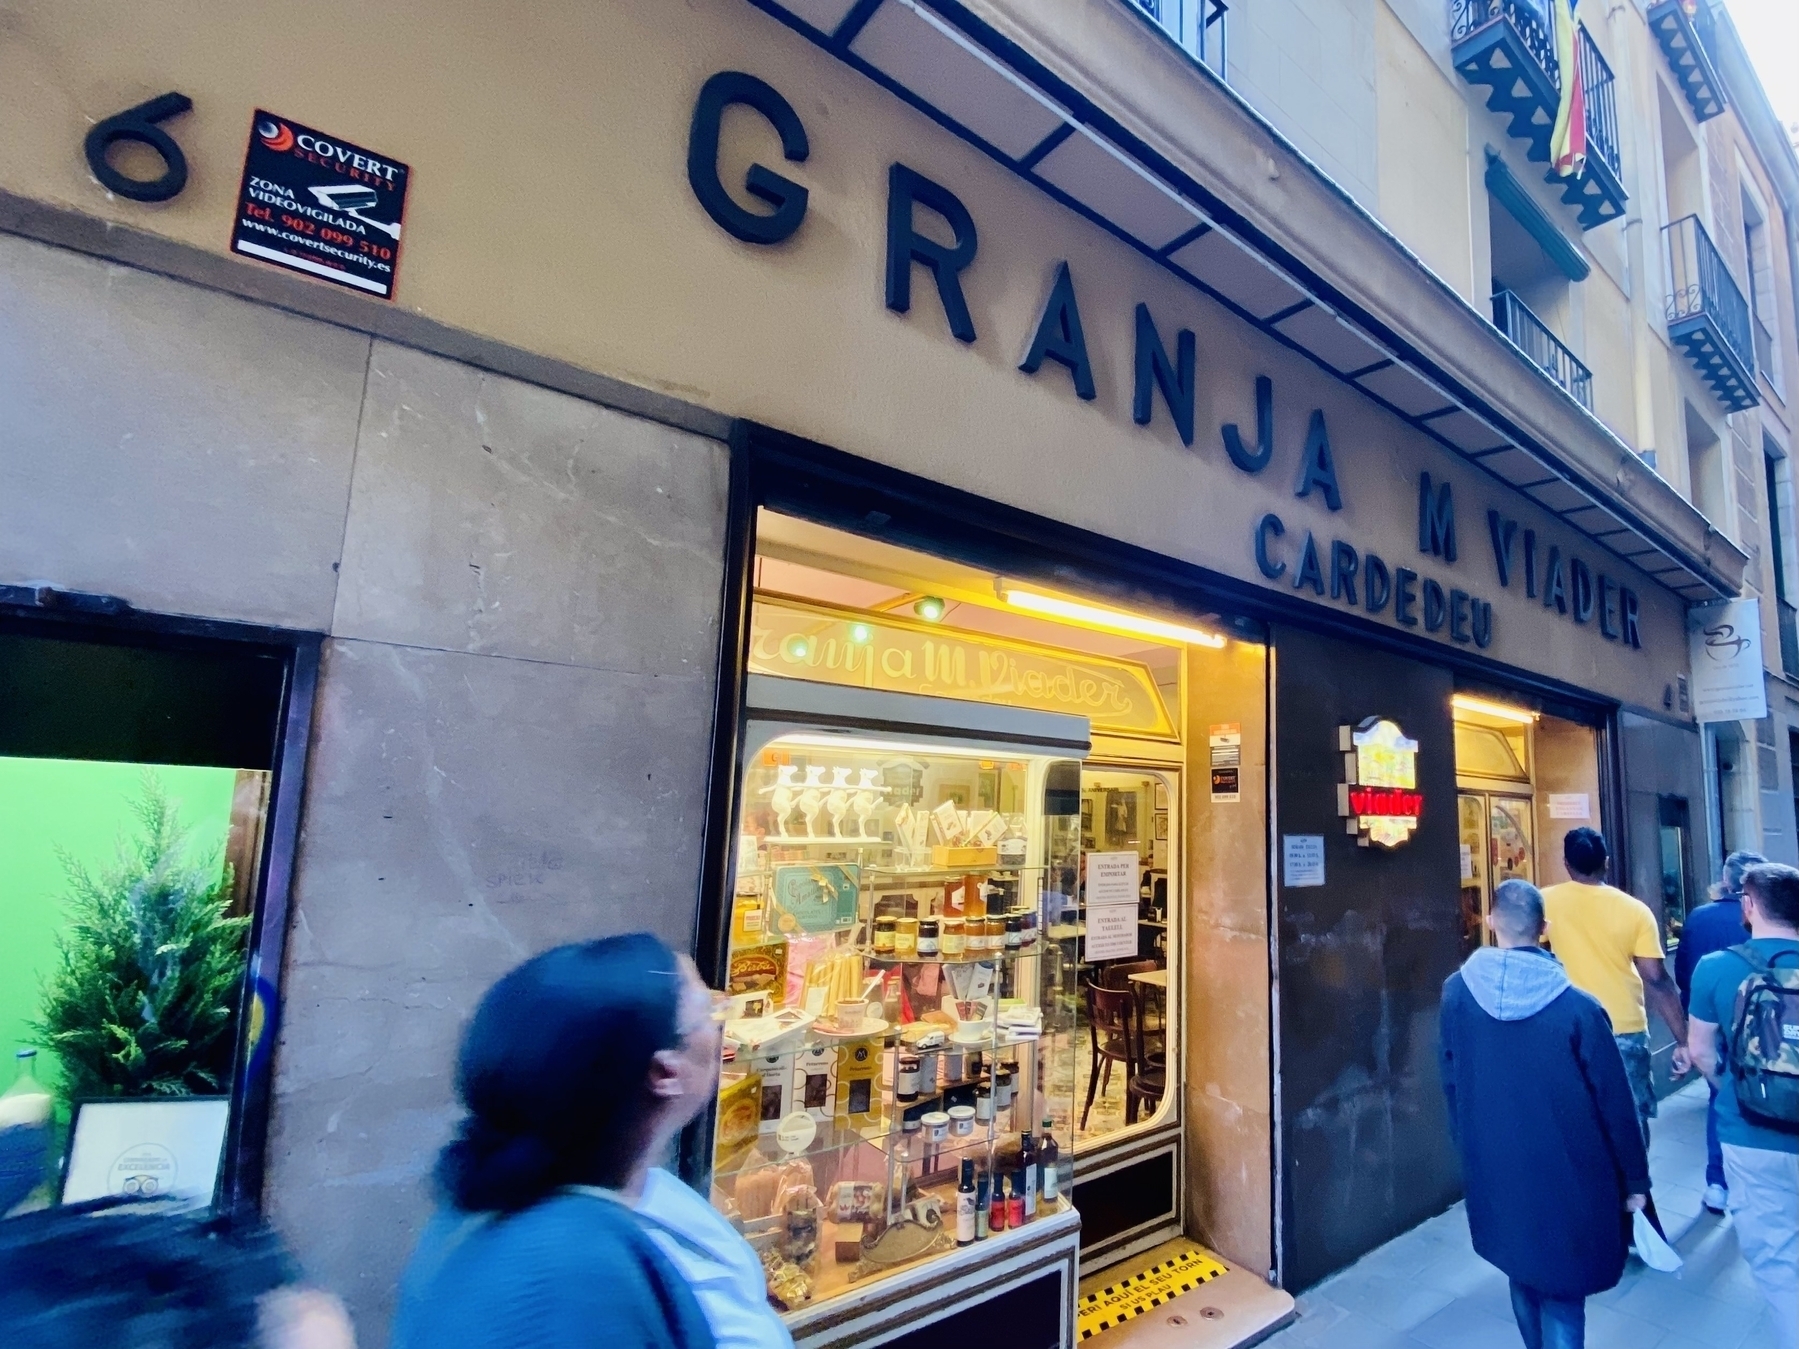 A few people walk past the outside of Granja M. Viader. A window display shows chocolates, jams, and wines for sale.